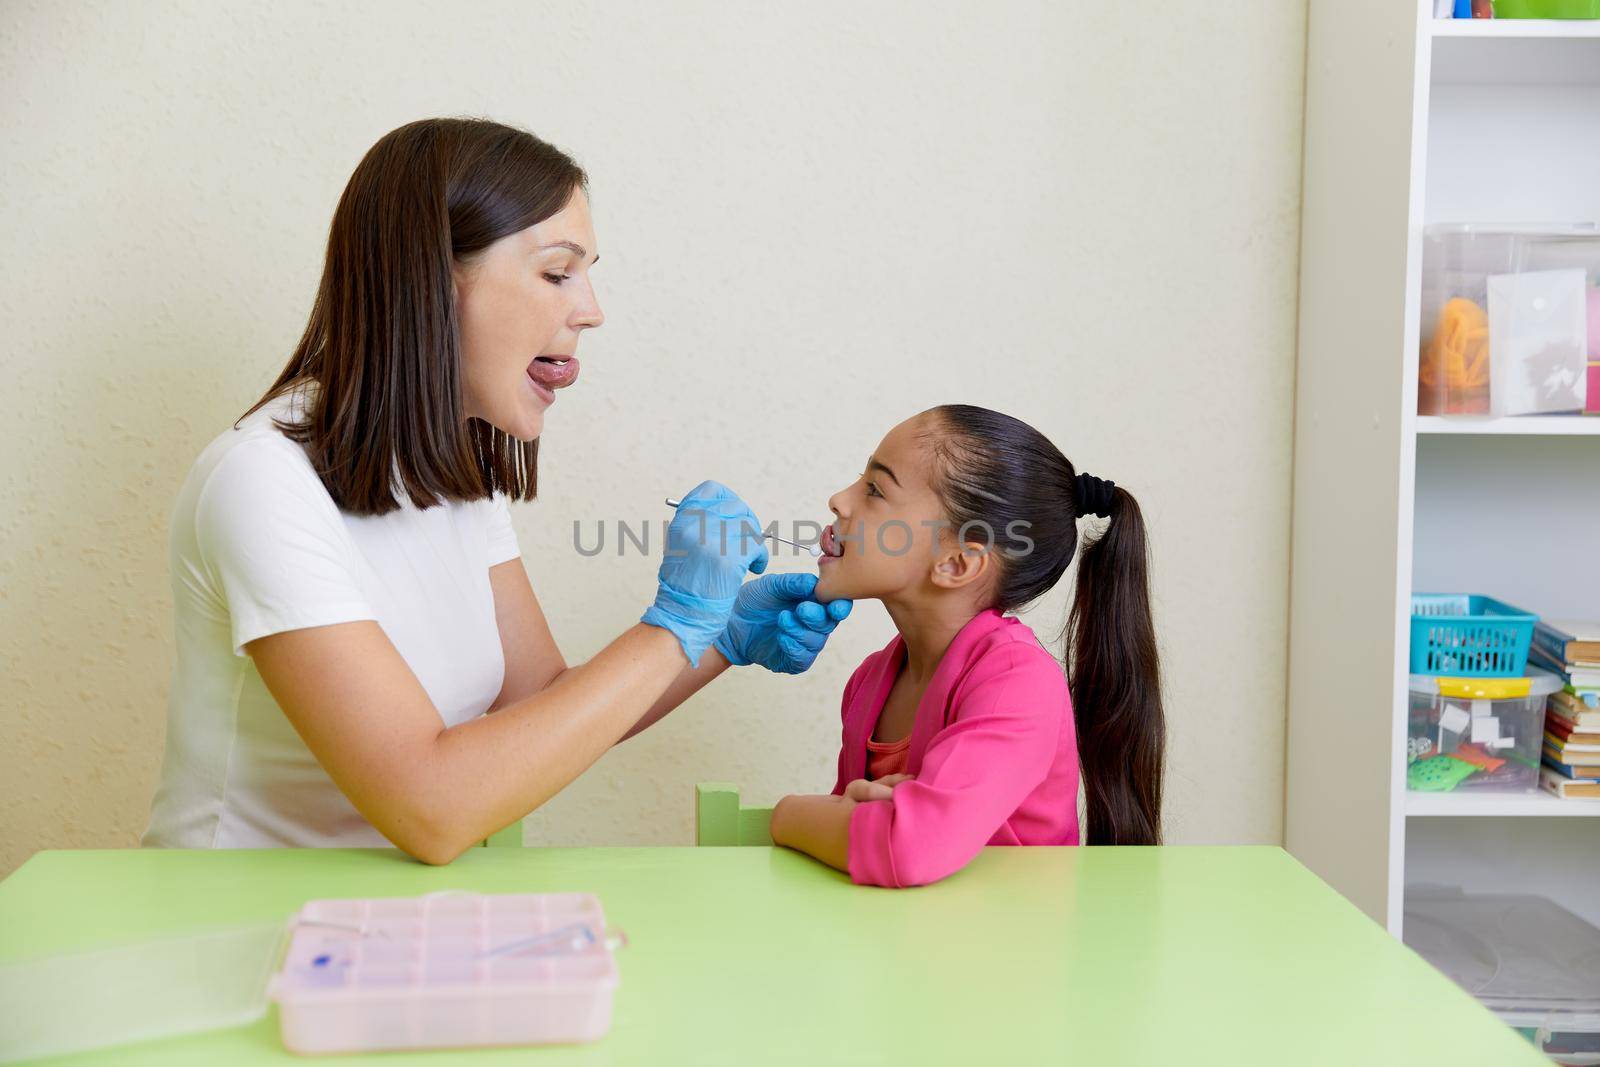 Speech therapist working with girl training pronunciation by Mariakray